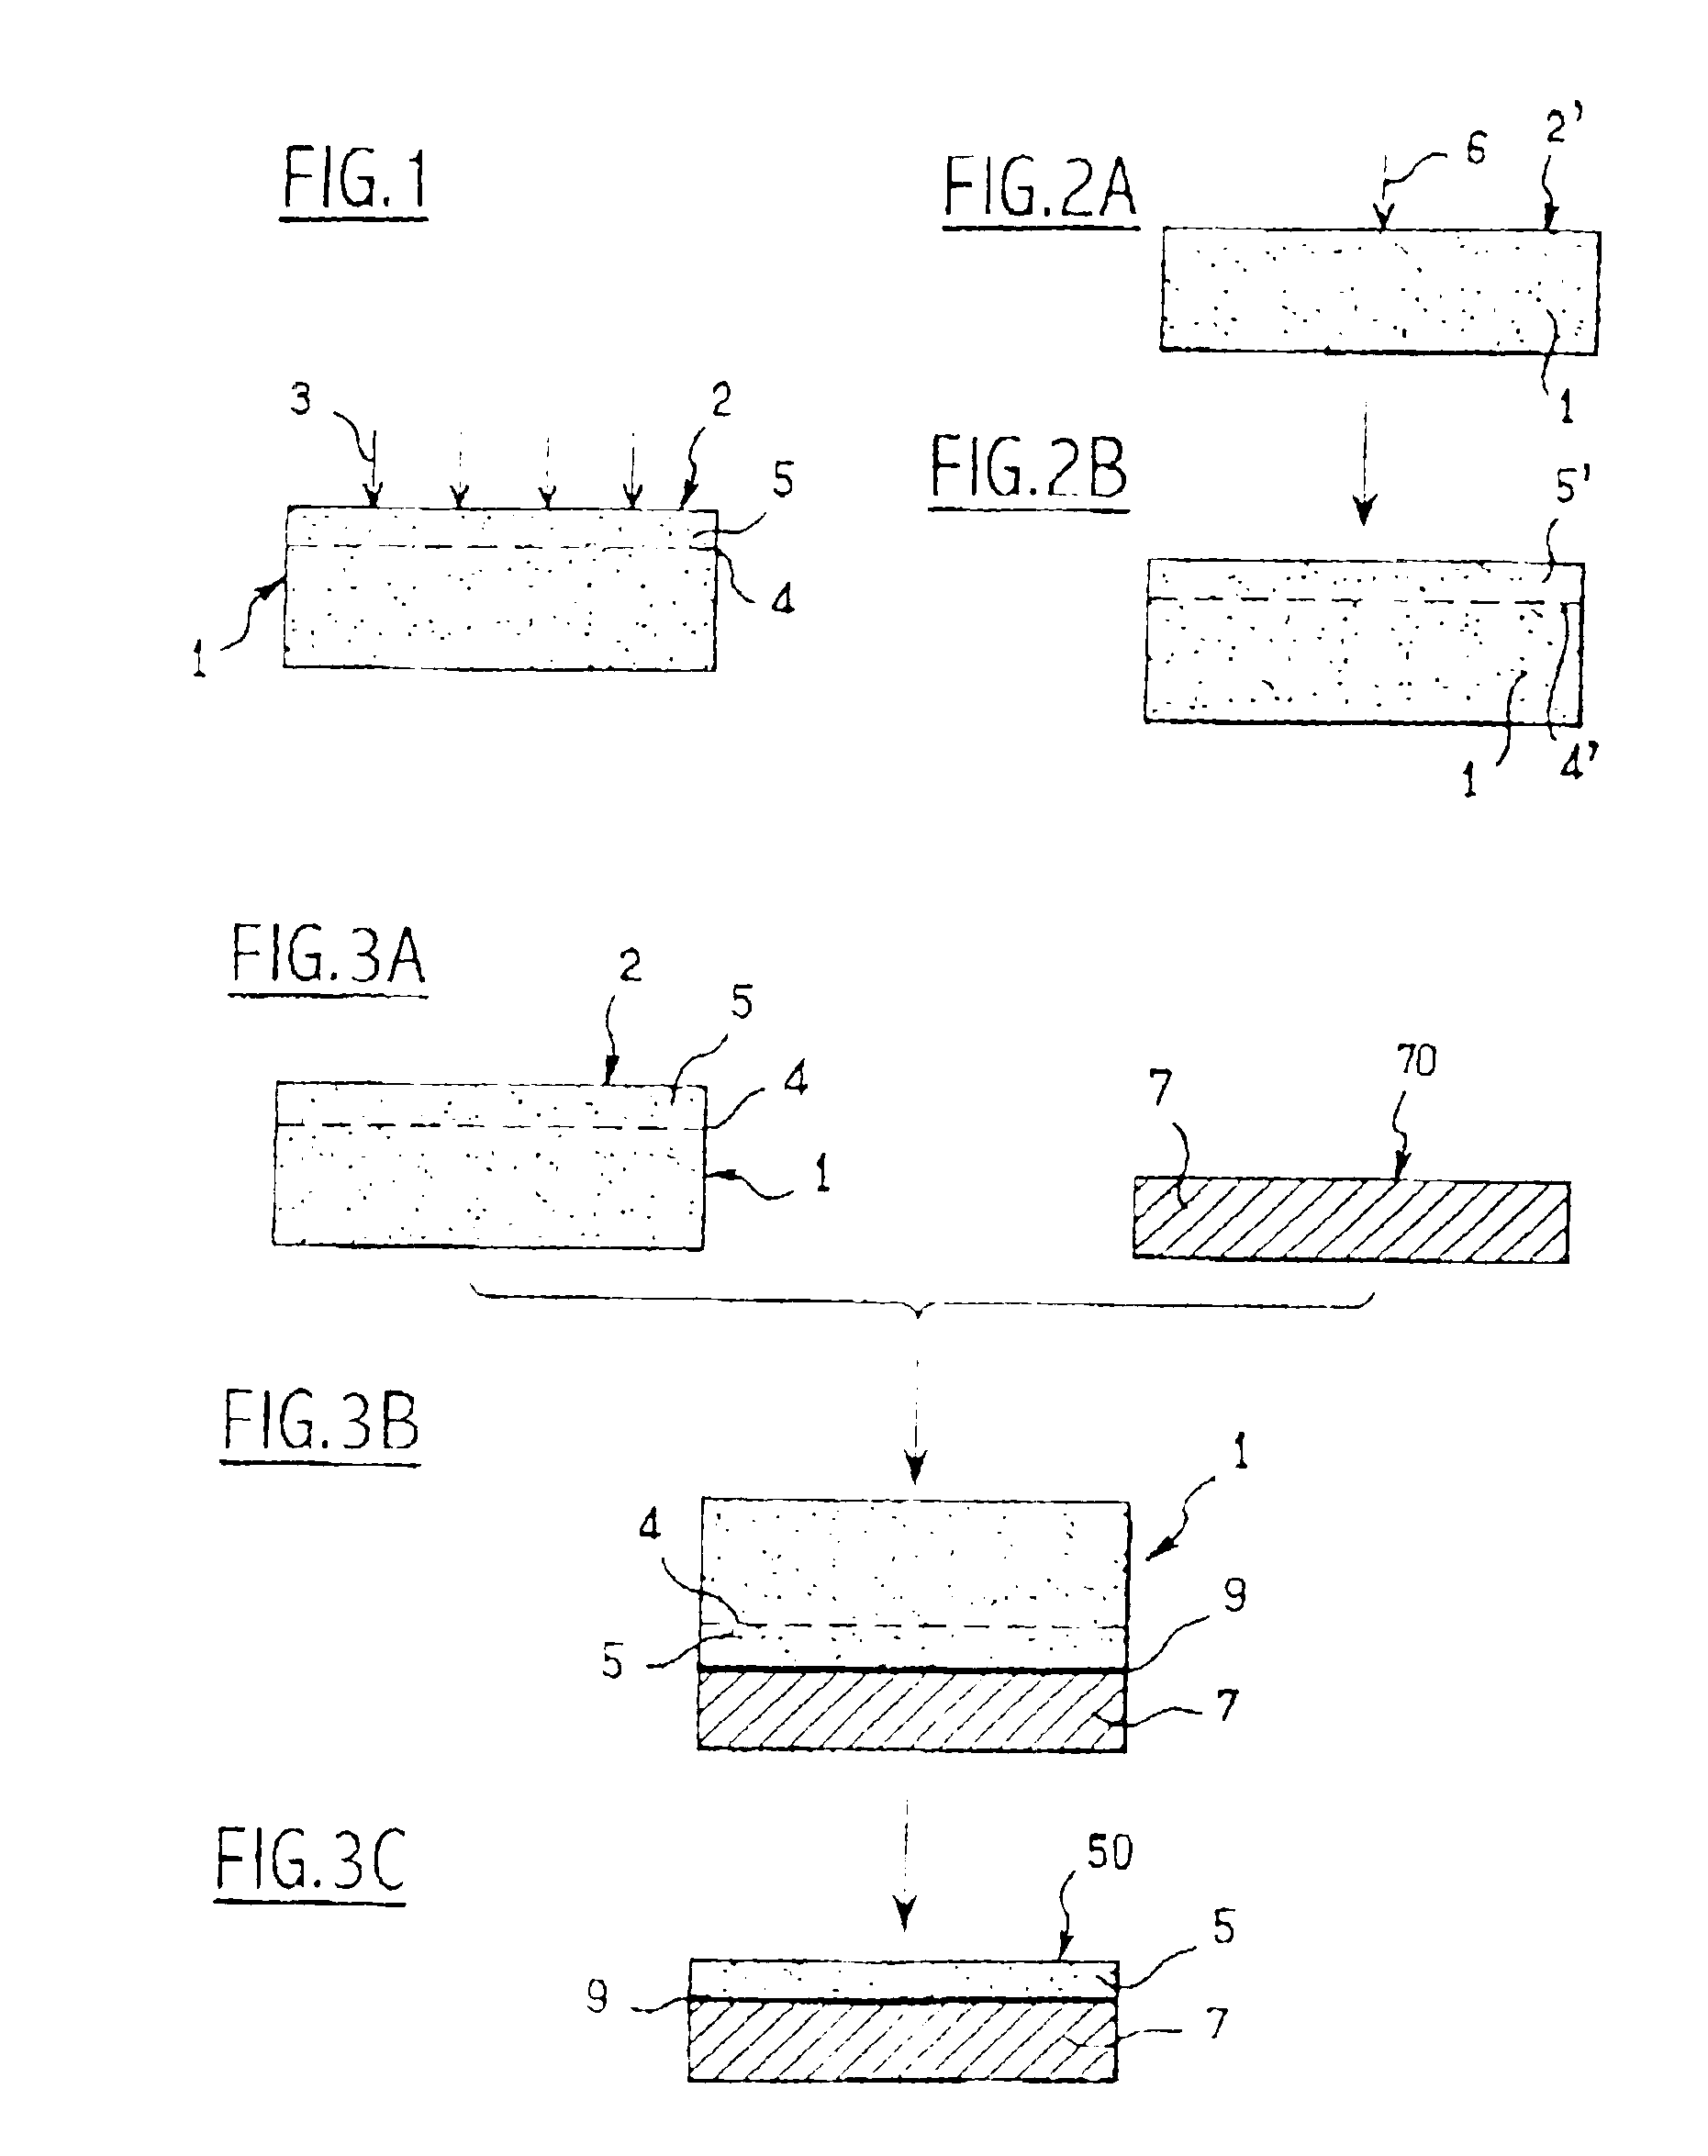 Method of manufacturing a free-standing substrate made of monocrystalline semi-conductor material